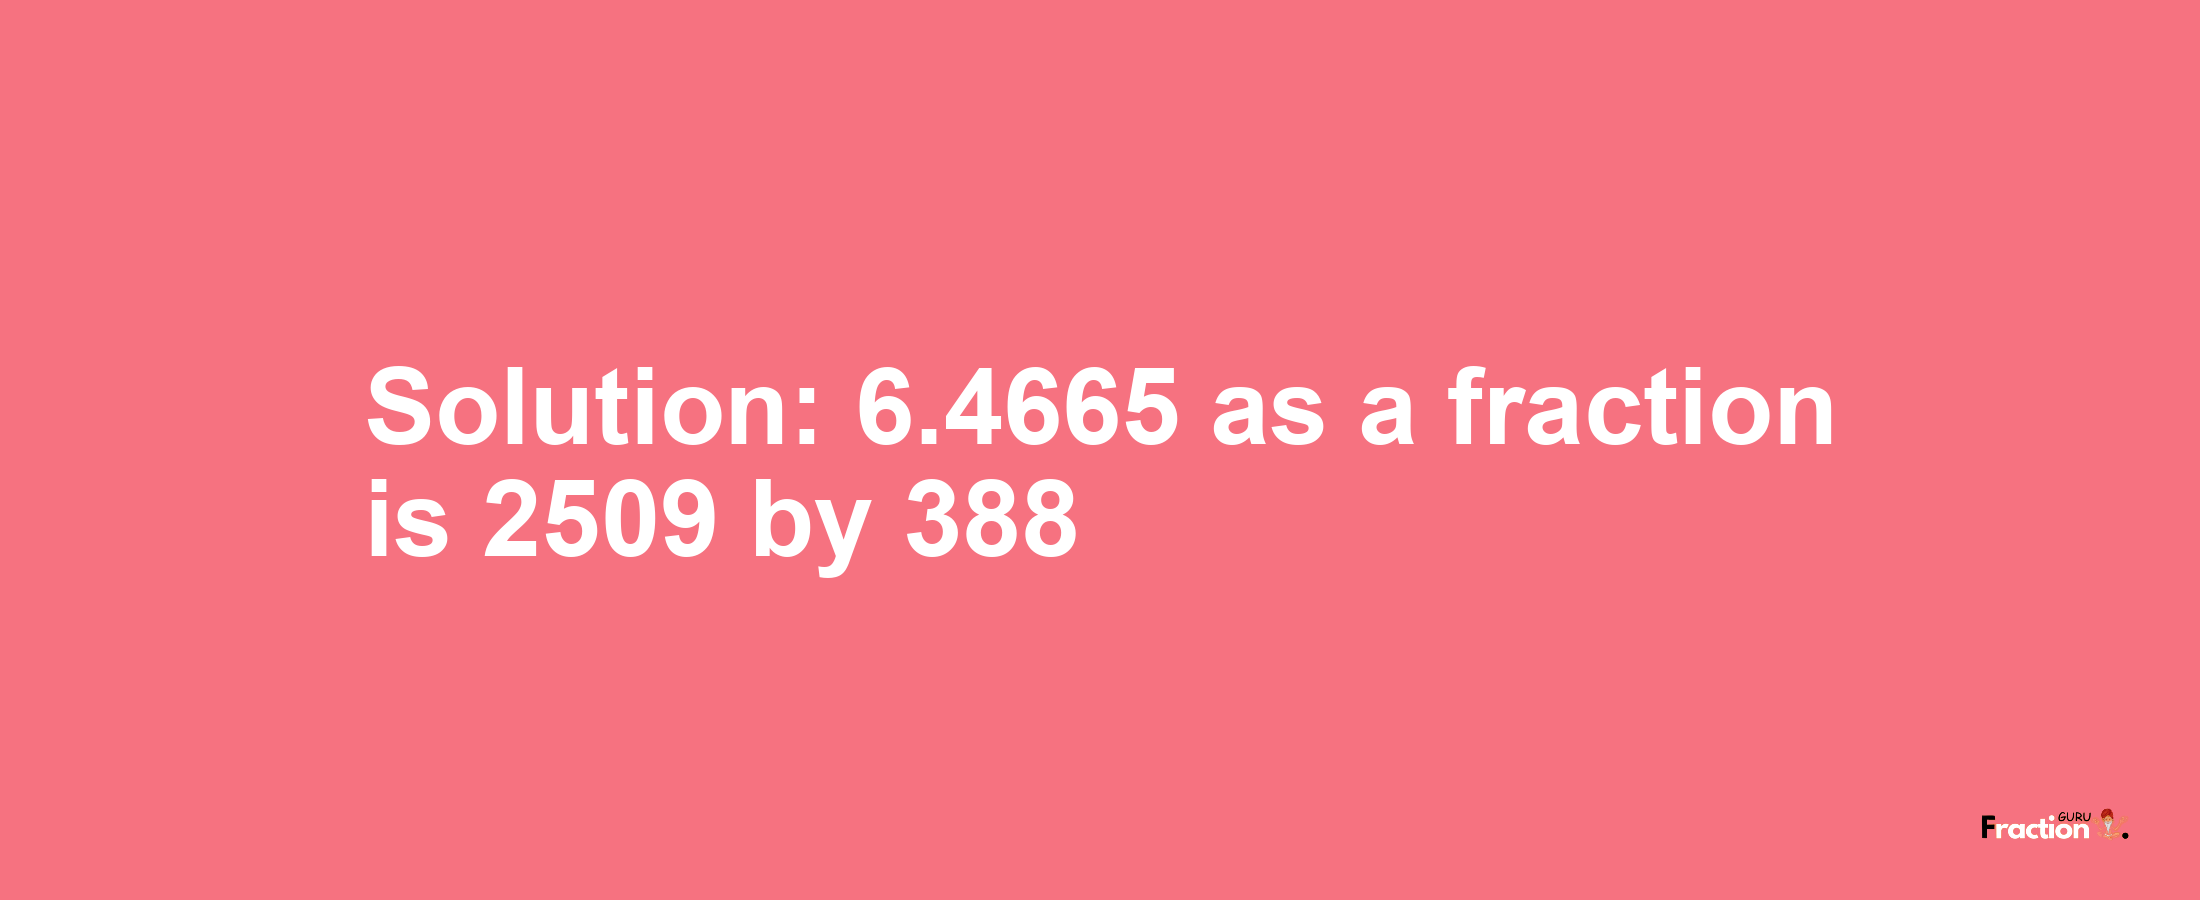 Solution:6.4665 as a fraction is 2509/388